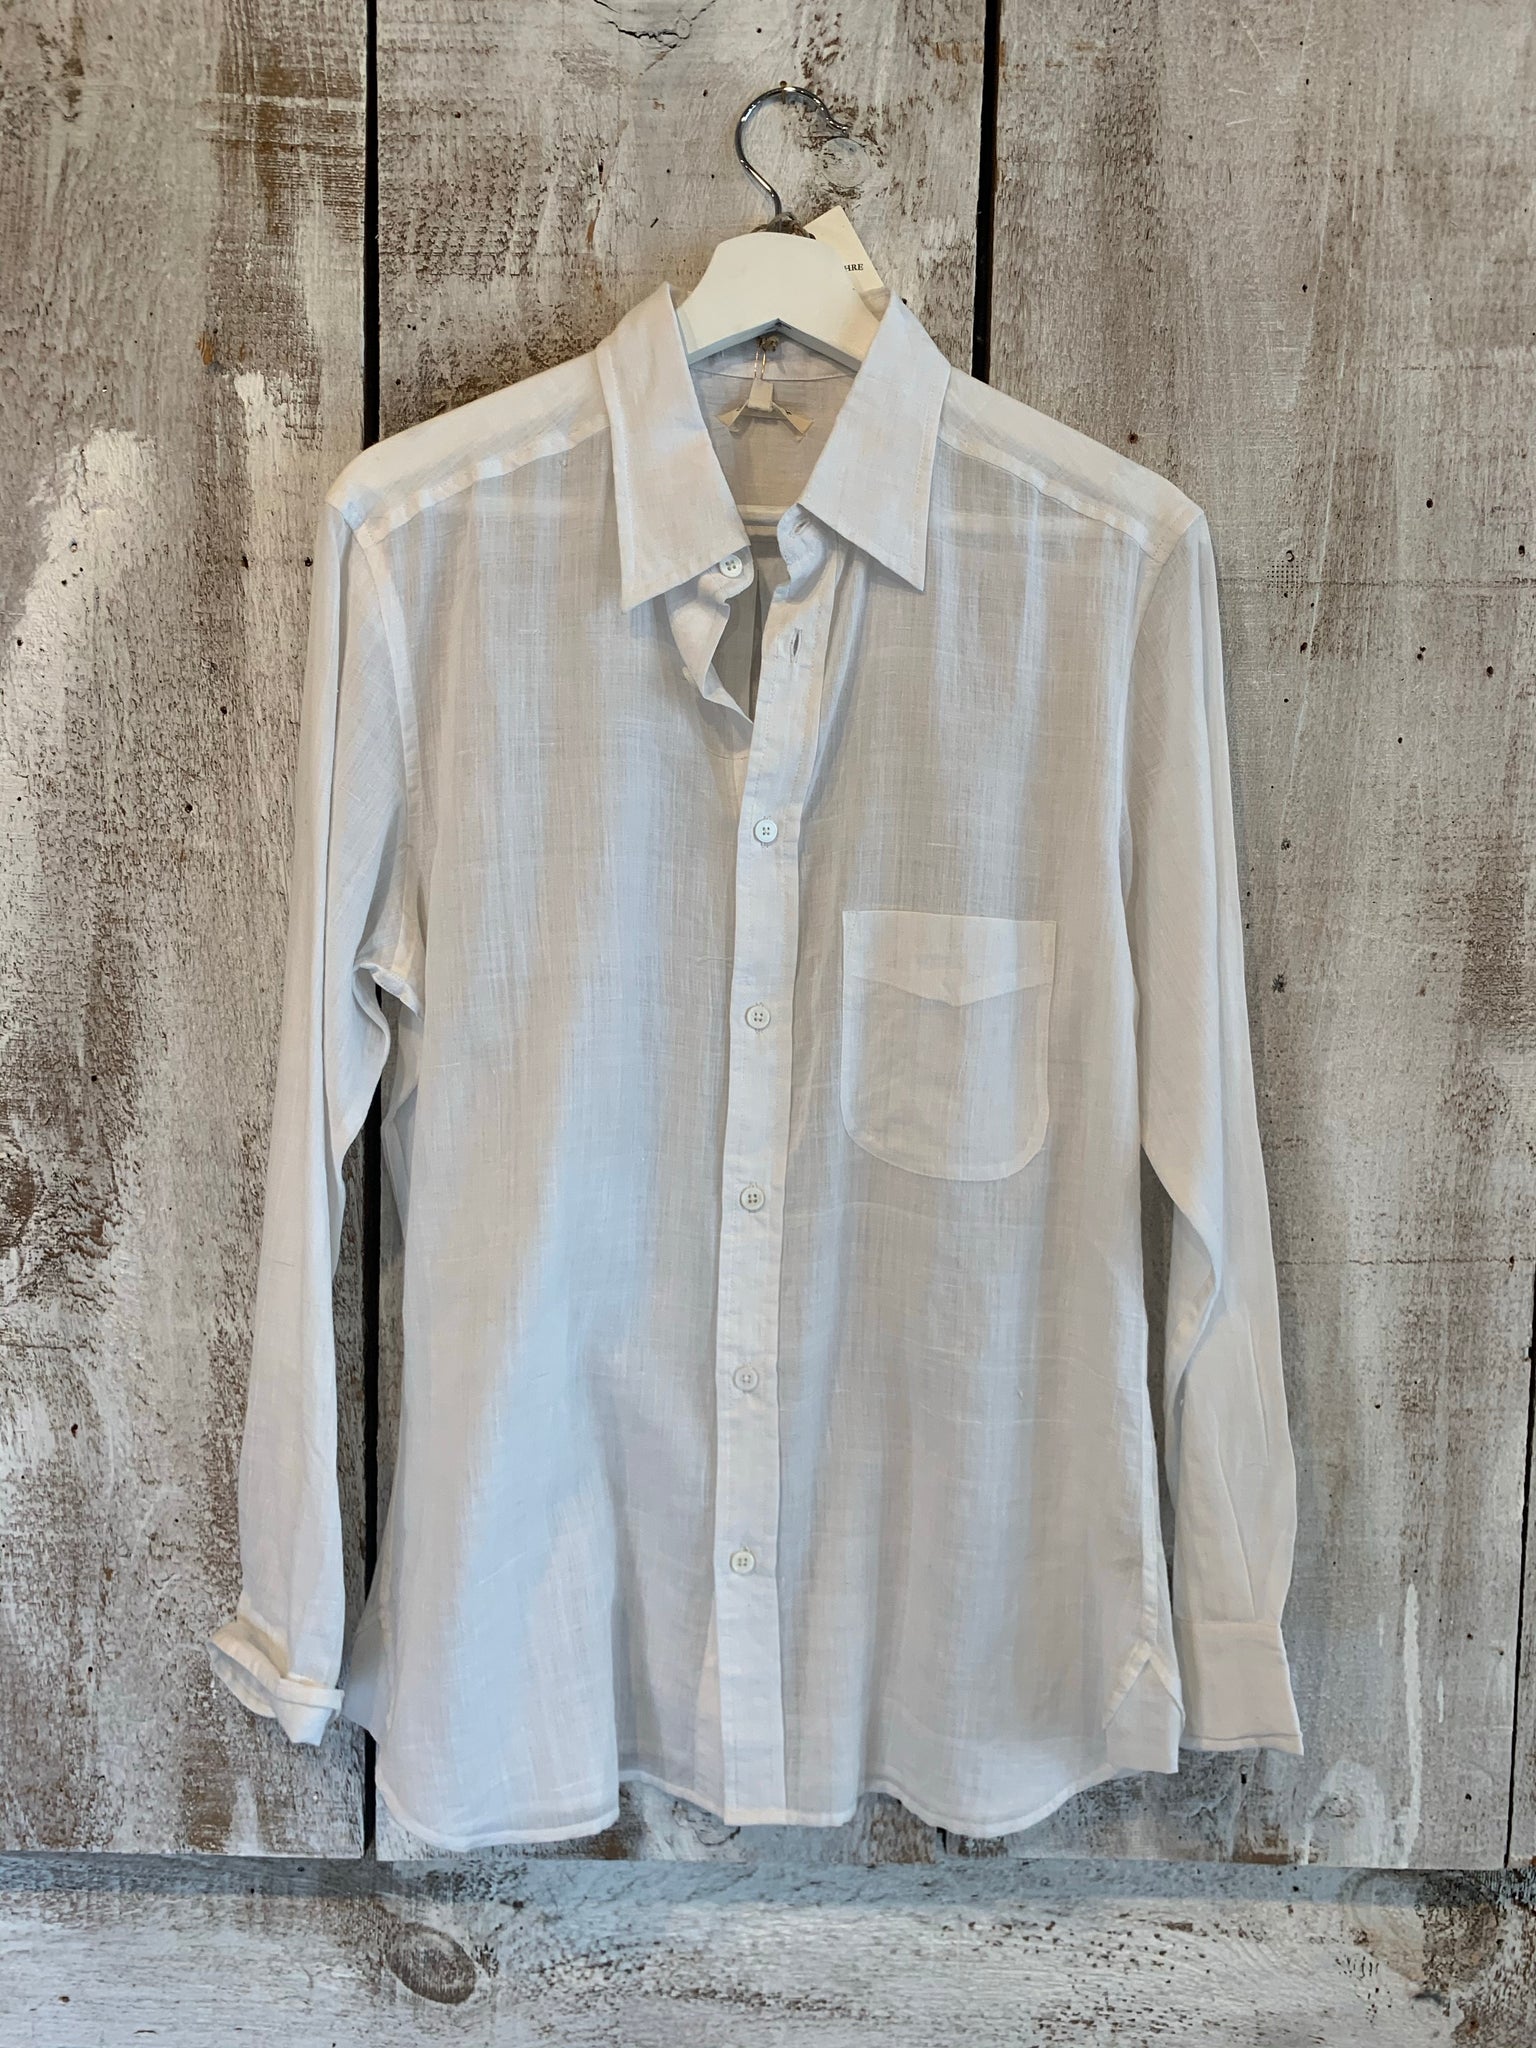 Umber and Ochre voile shirt